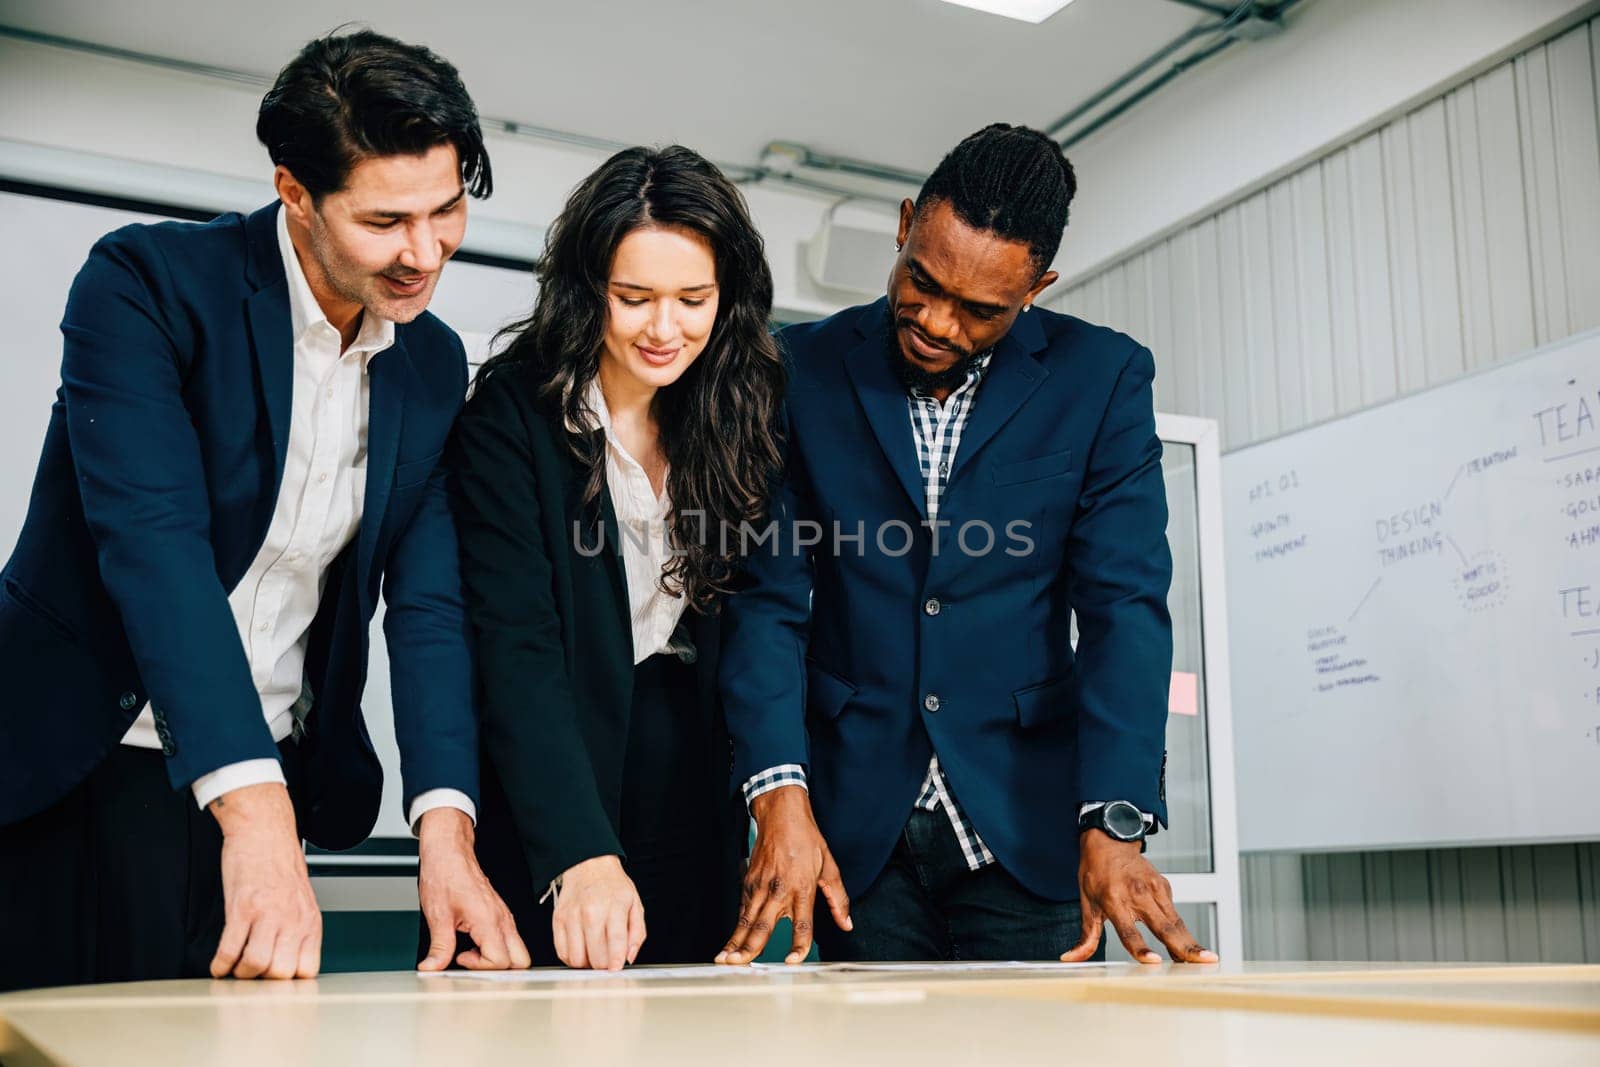 Colleagues at a conference room desk stand, actively planning for business success. Teamwork, diversity, and leadership define this successful meeting. by Sorapop